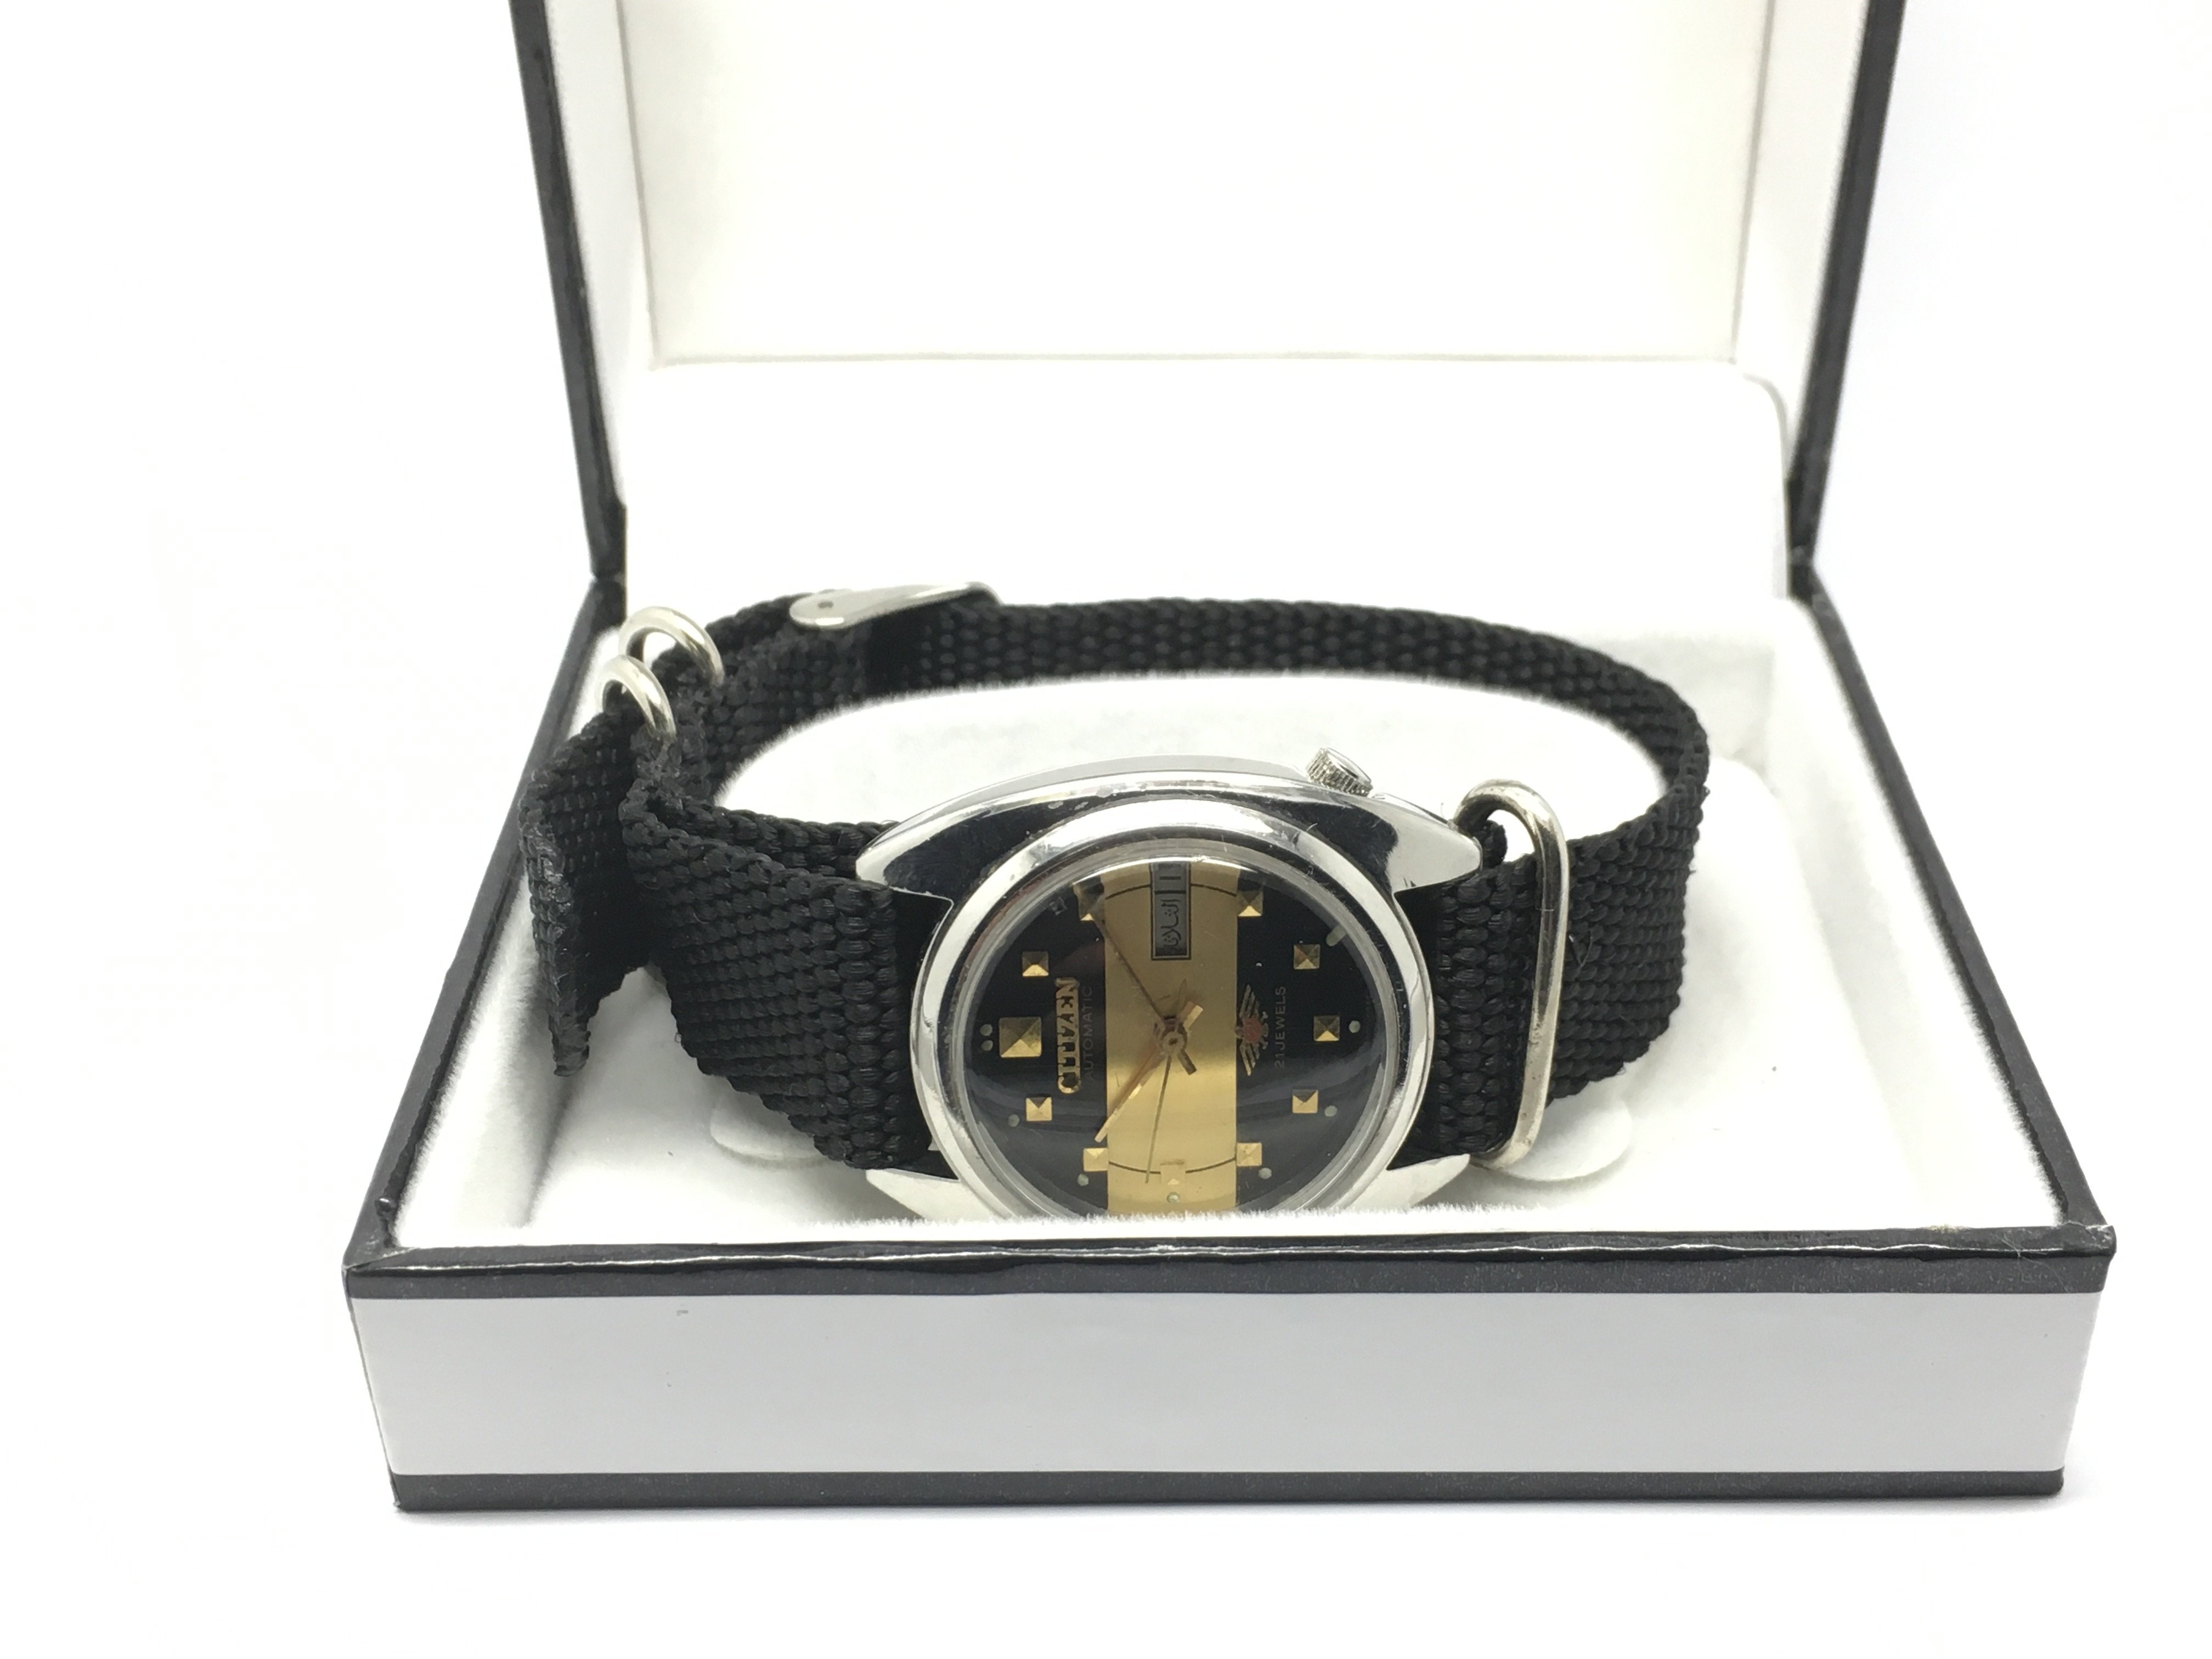 A Citizen automatic watch with black and gold tone